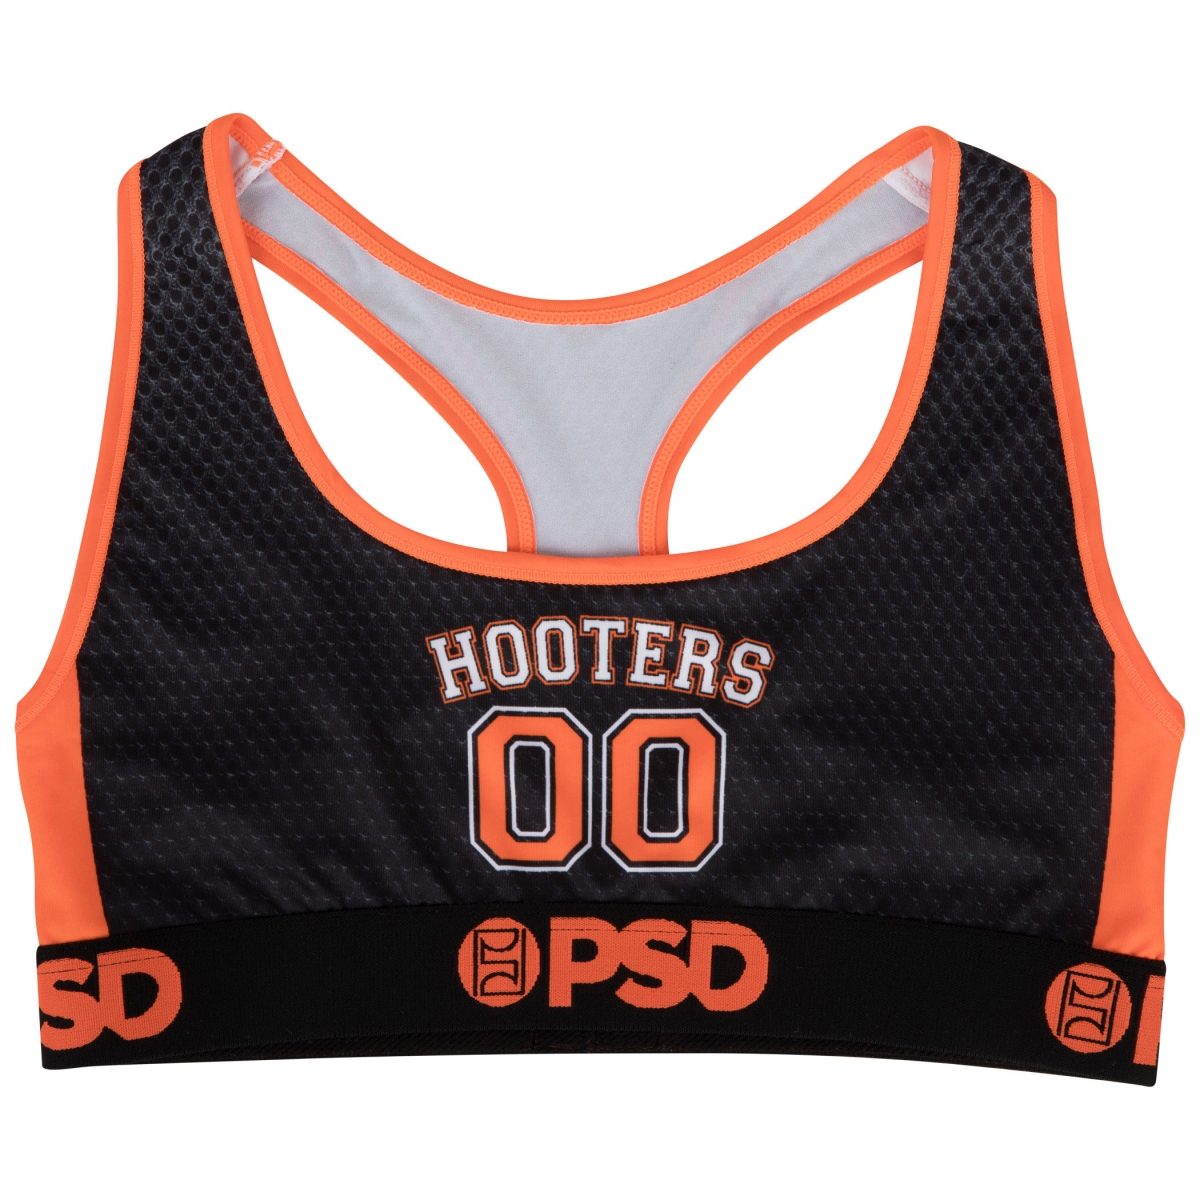 Hooters 859706-xsmall Restaurant Game Day Uniform PSD Sports